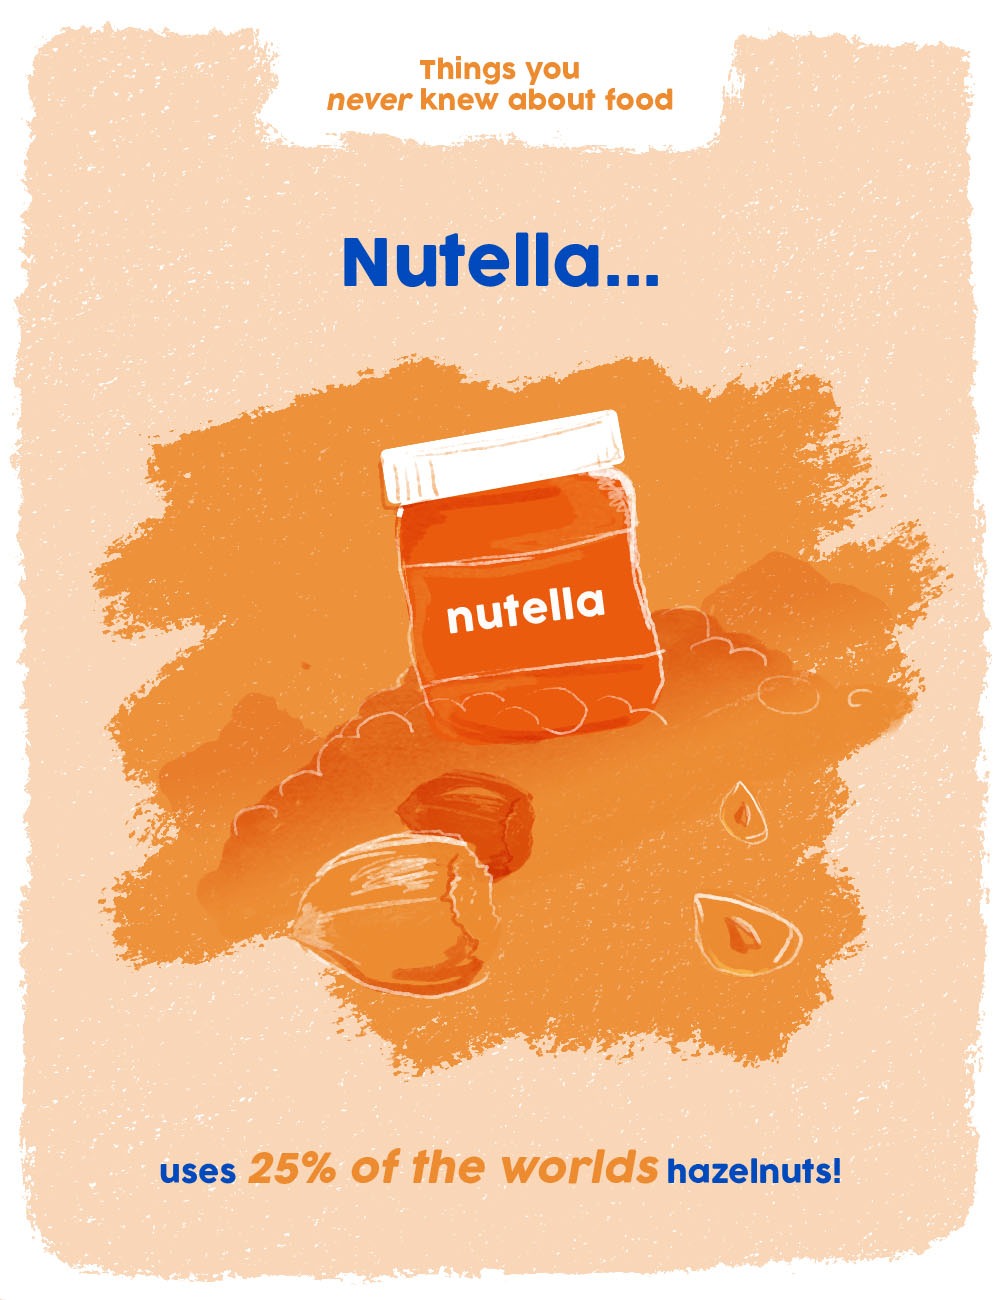 things you never knew about food graphics - nutella facts